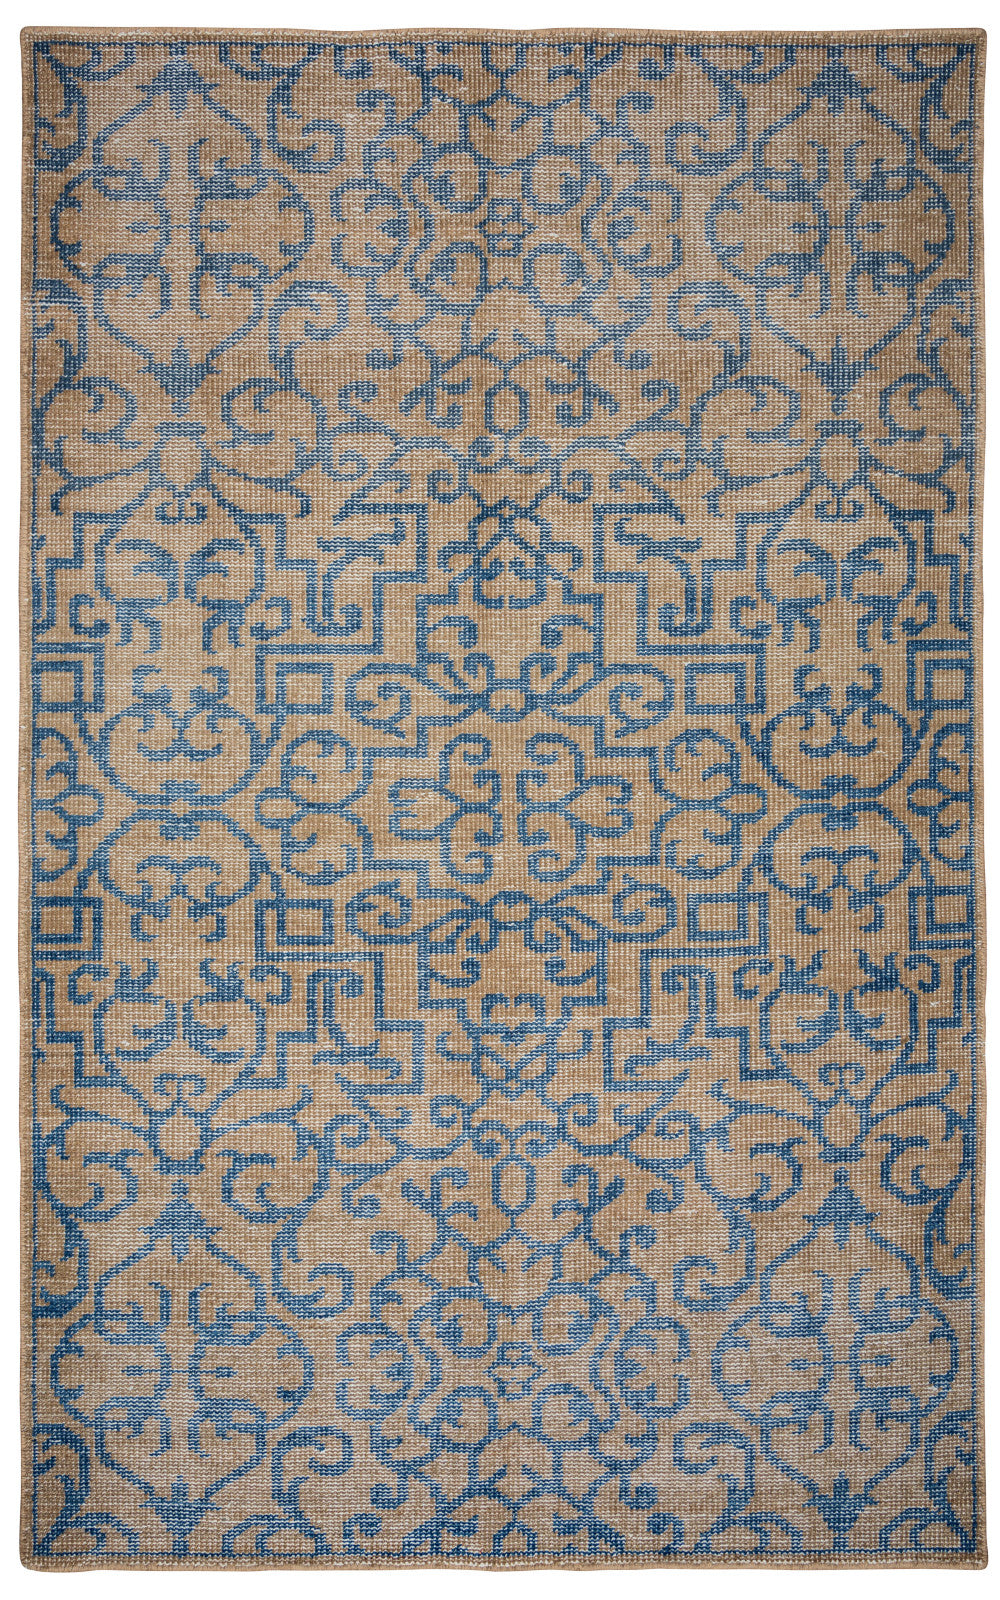 Rizzy Maison MS8674 Natural Area Rug